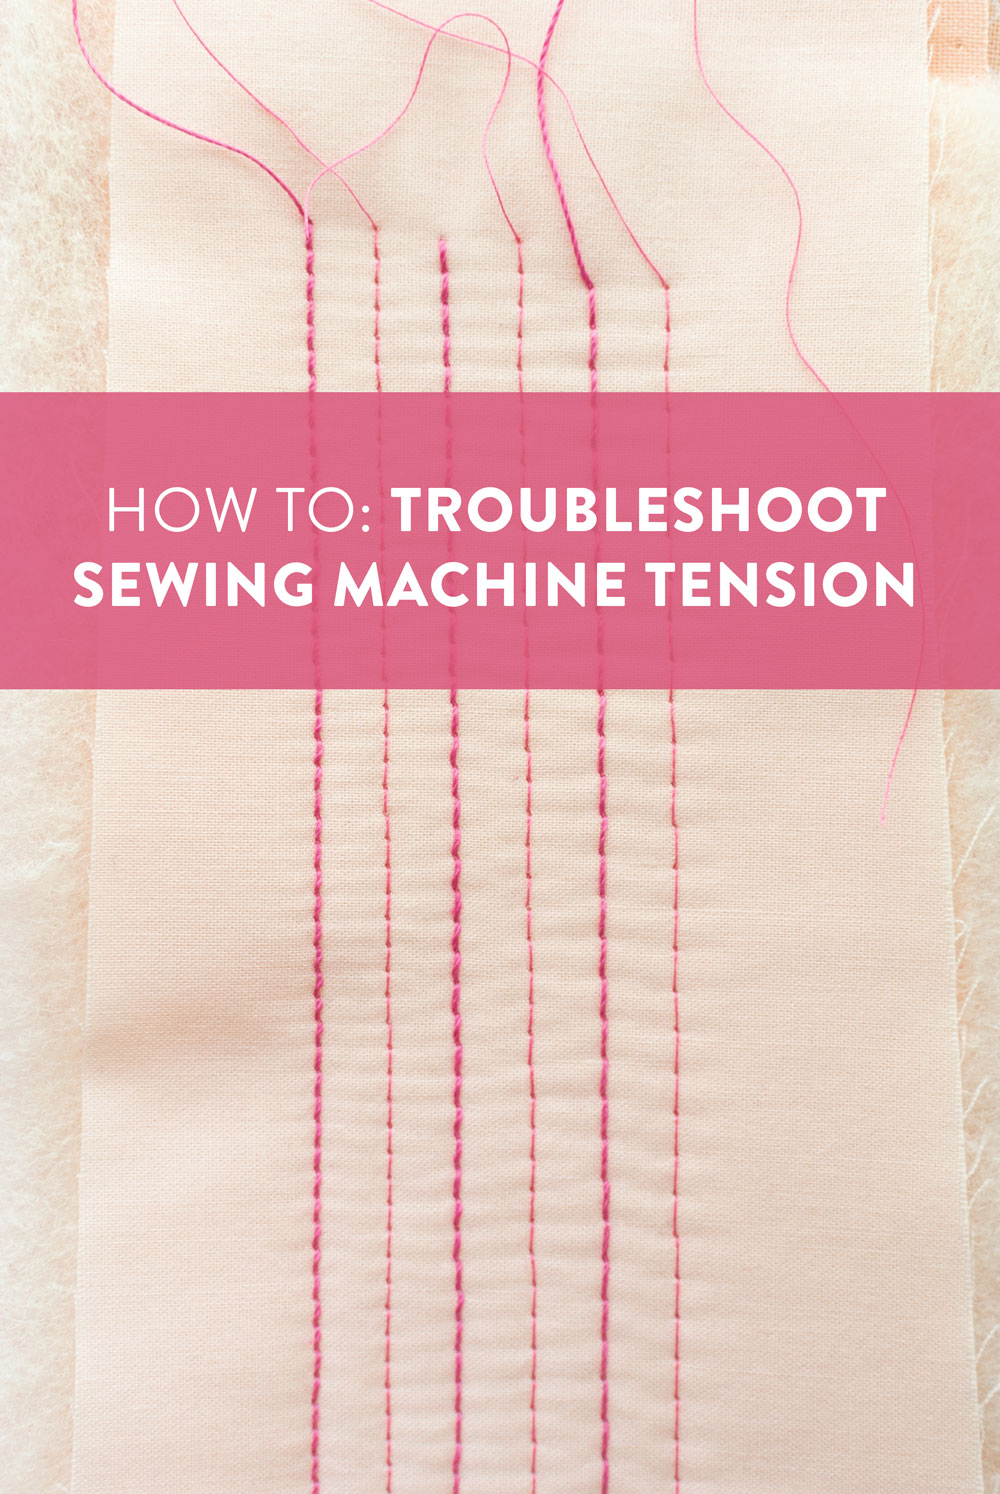 How to troubleshoot sewing machine tension! Loose, tangled stitches are a problem and there IS a solution. Use this thread tension checklist to fix your sewing machine problems. suzyquilts.com